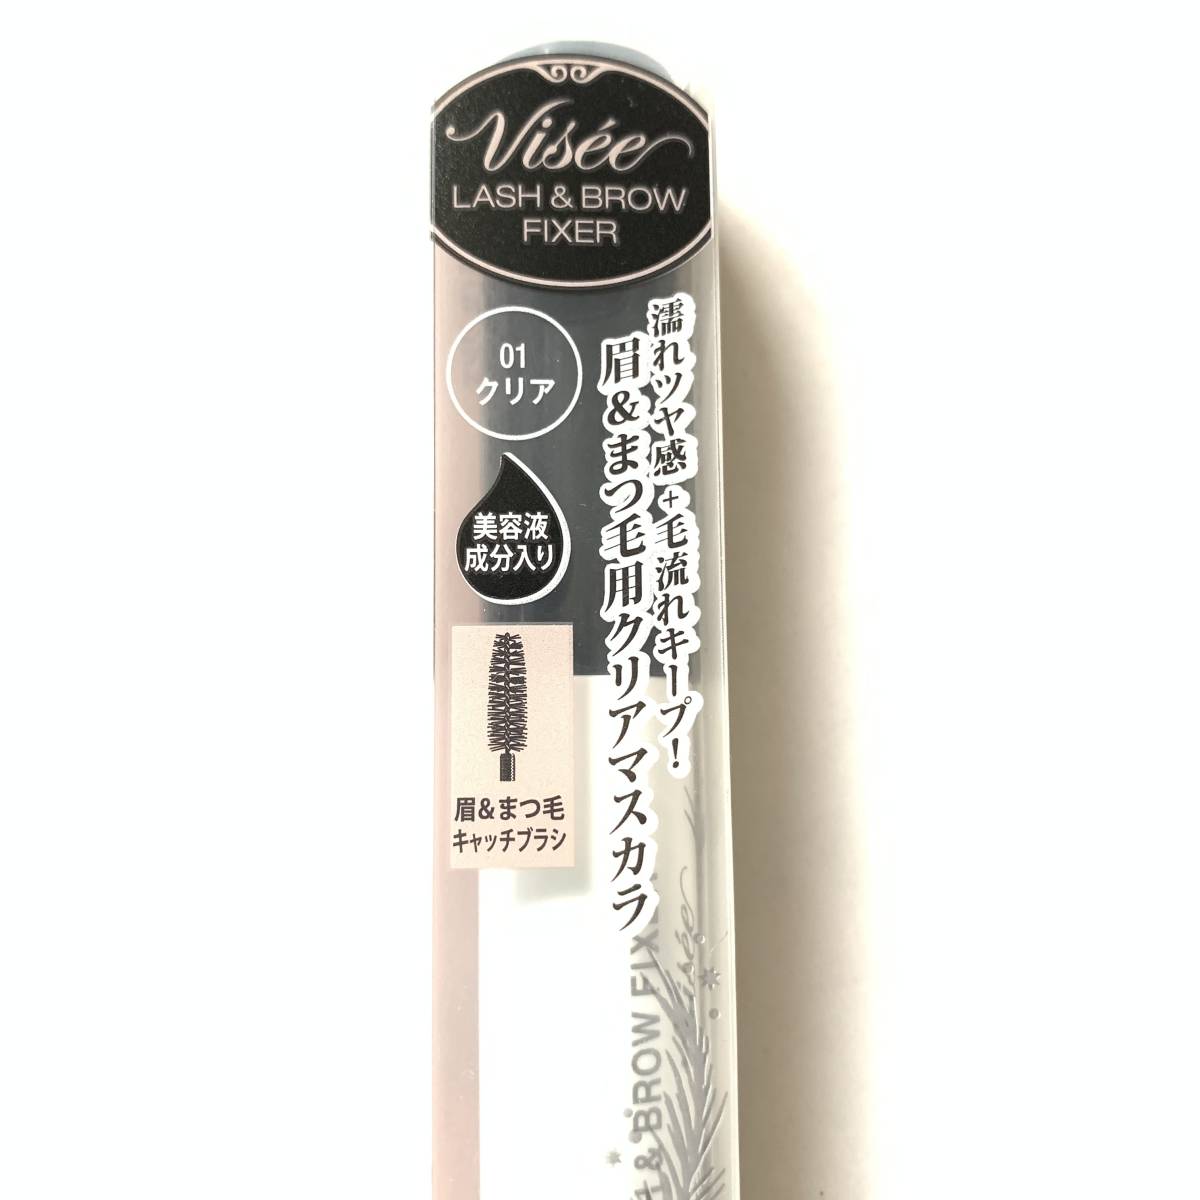  new goods *VISEE Visee lishe Rush &b low fixer 01 clear ( mascara * eyebrows )*